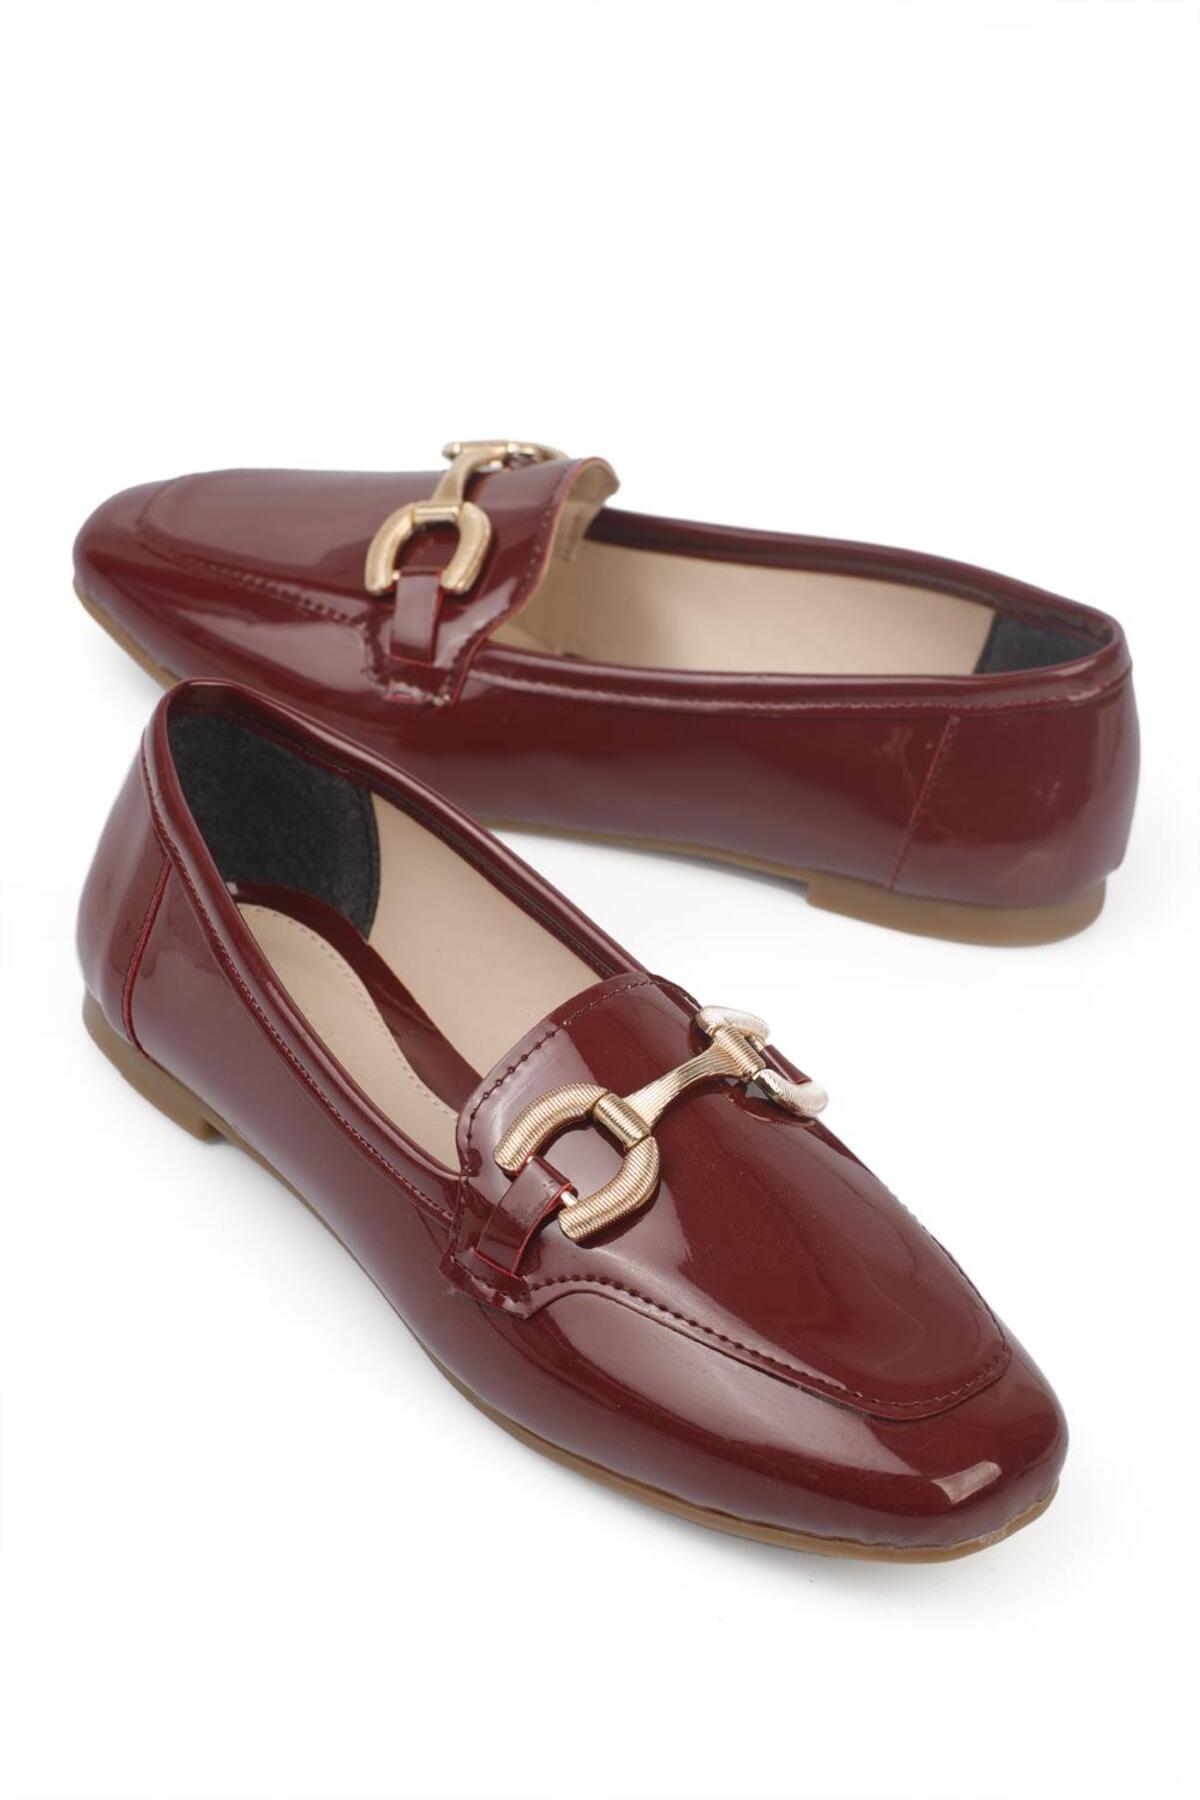 Capone Outfitters Women's Loafer with Front Buckle Accessory